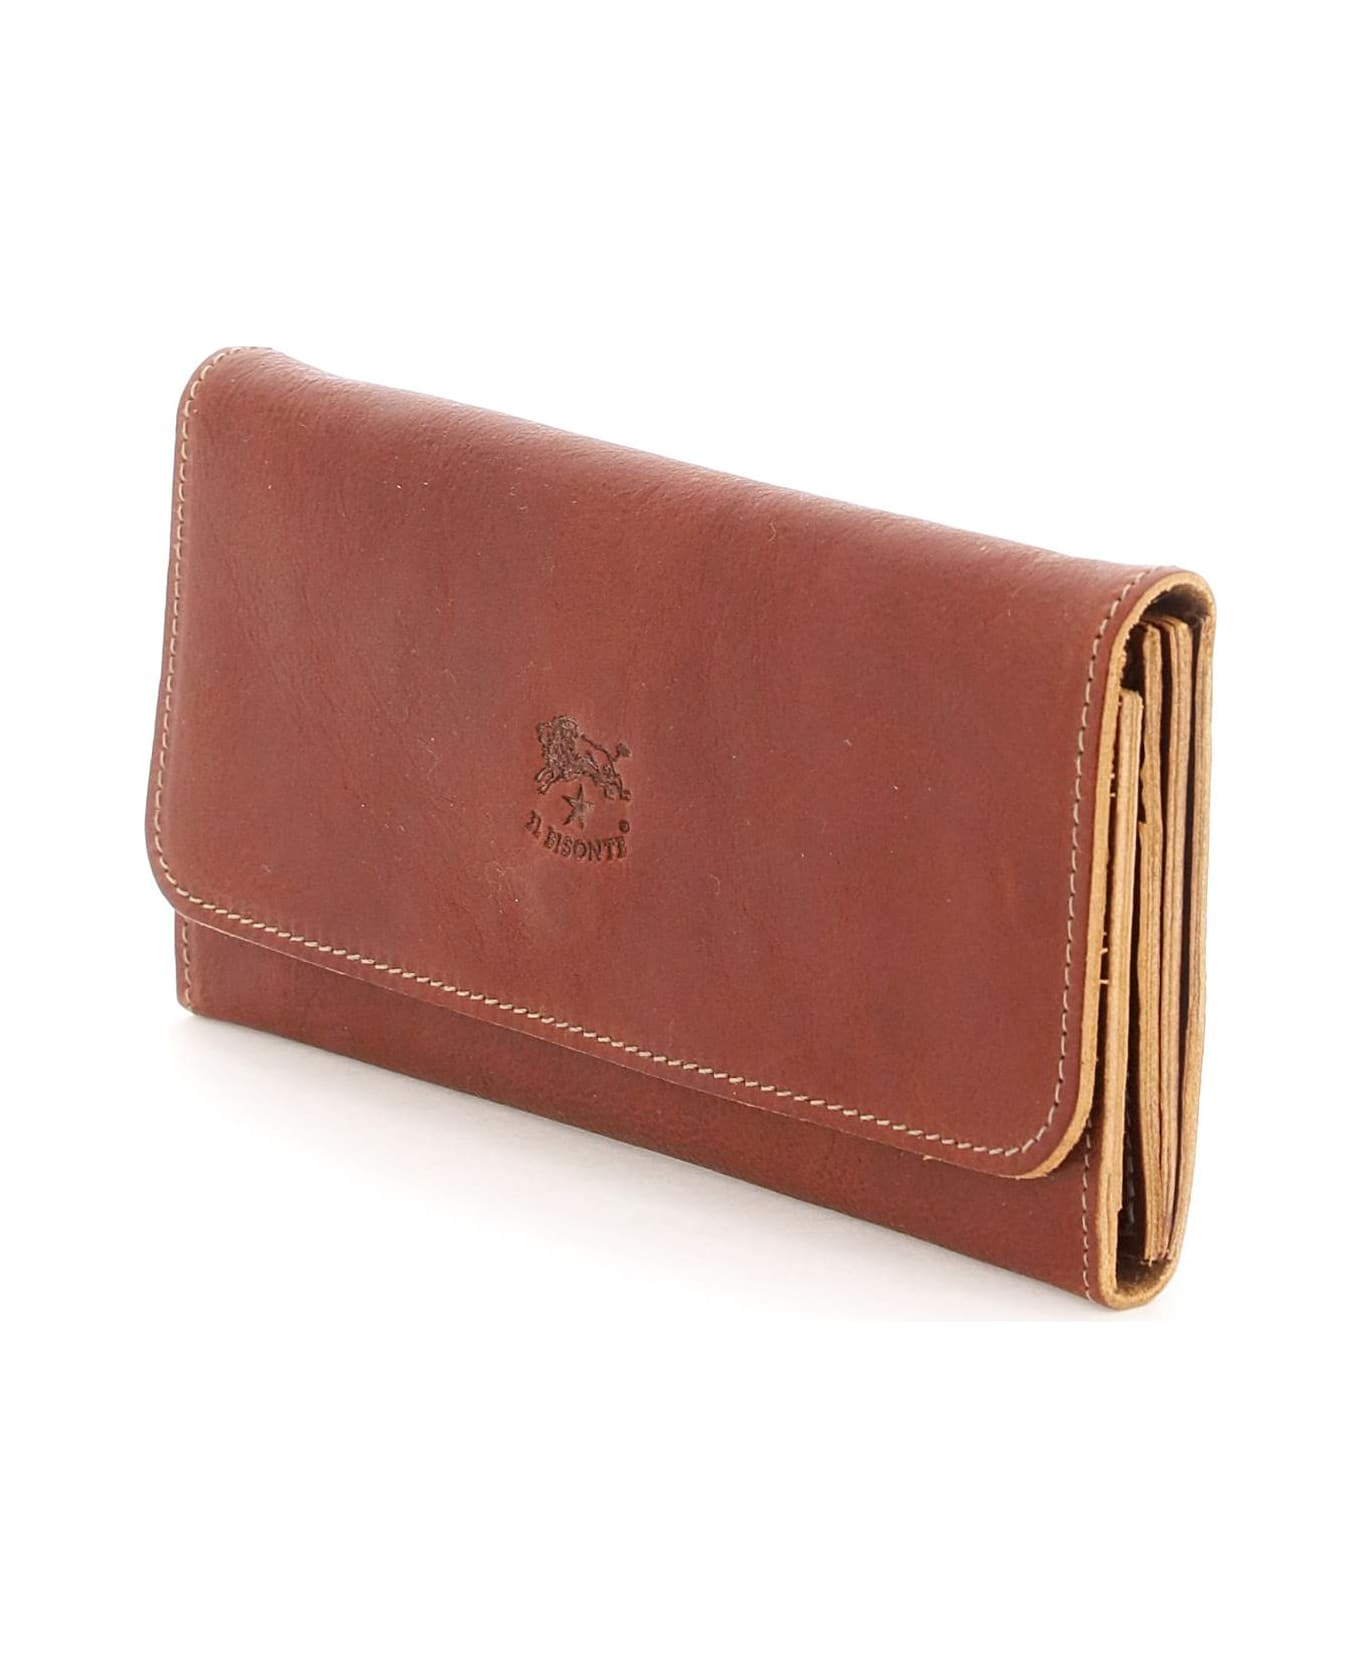 Il Bisonte Leather Wallet - SEPPIA (Brown)